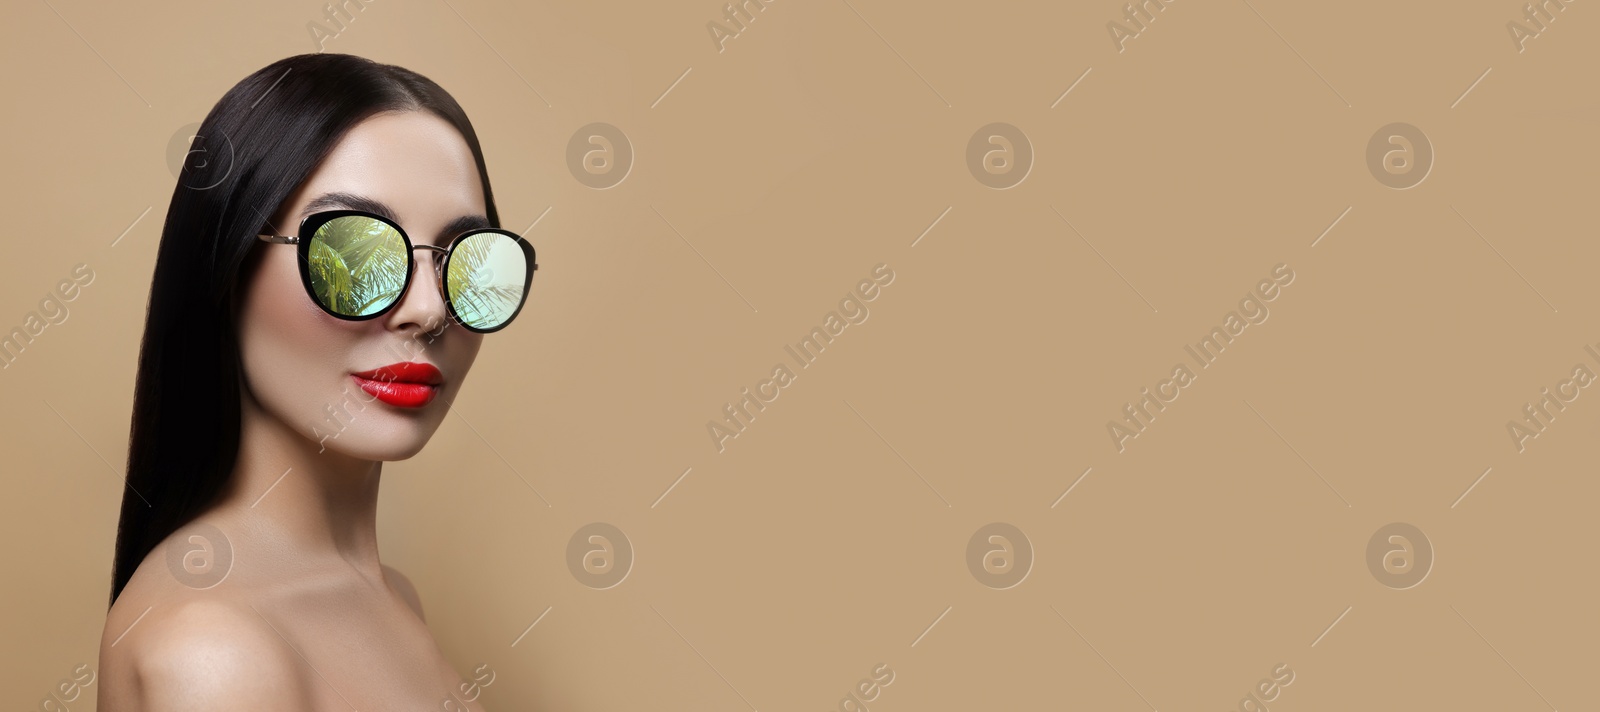 Image of Attractive woman in stylish sunglasses on dark beige background, space for text. Palm leaves and sky reflecting in lenses. Banner design